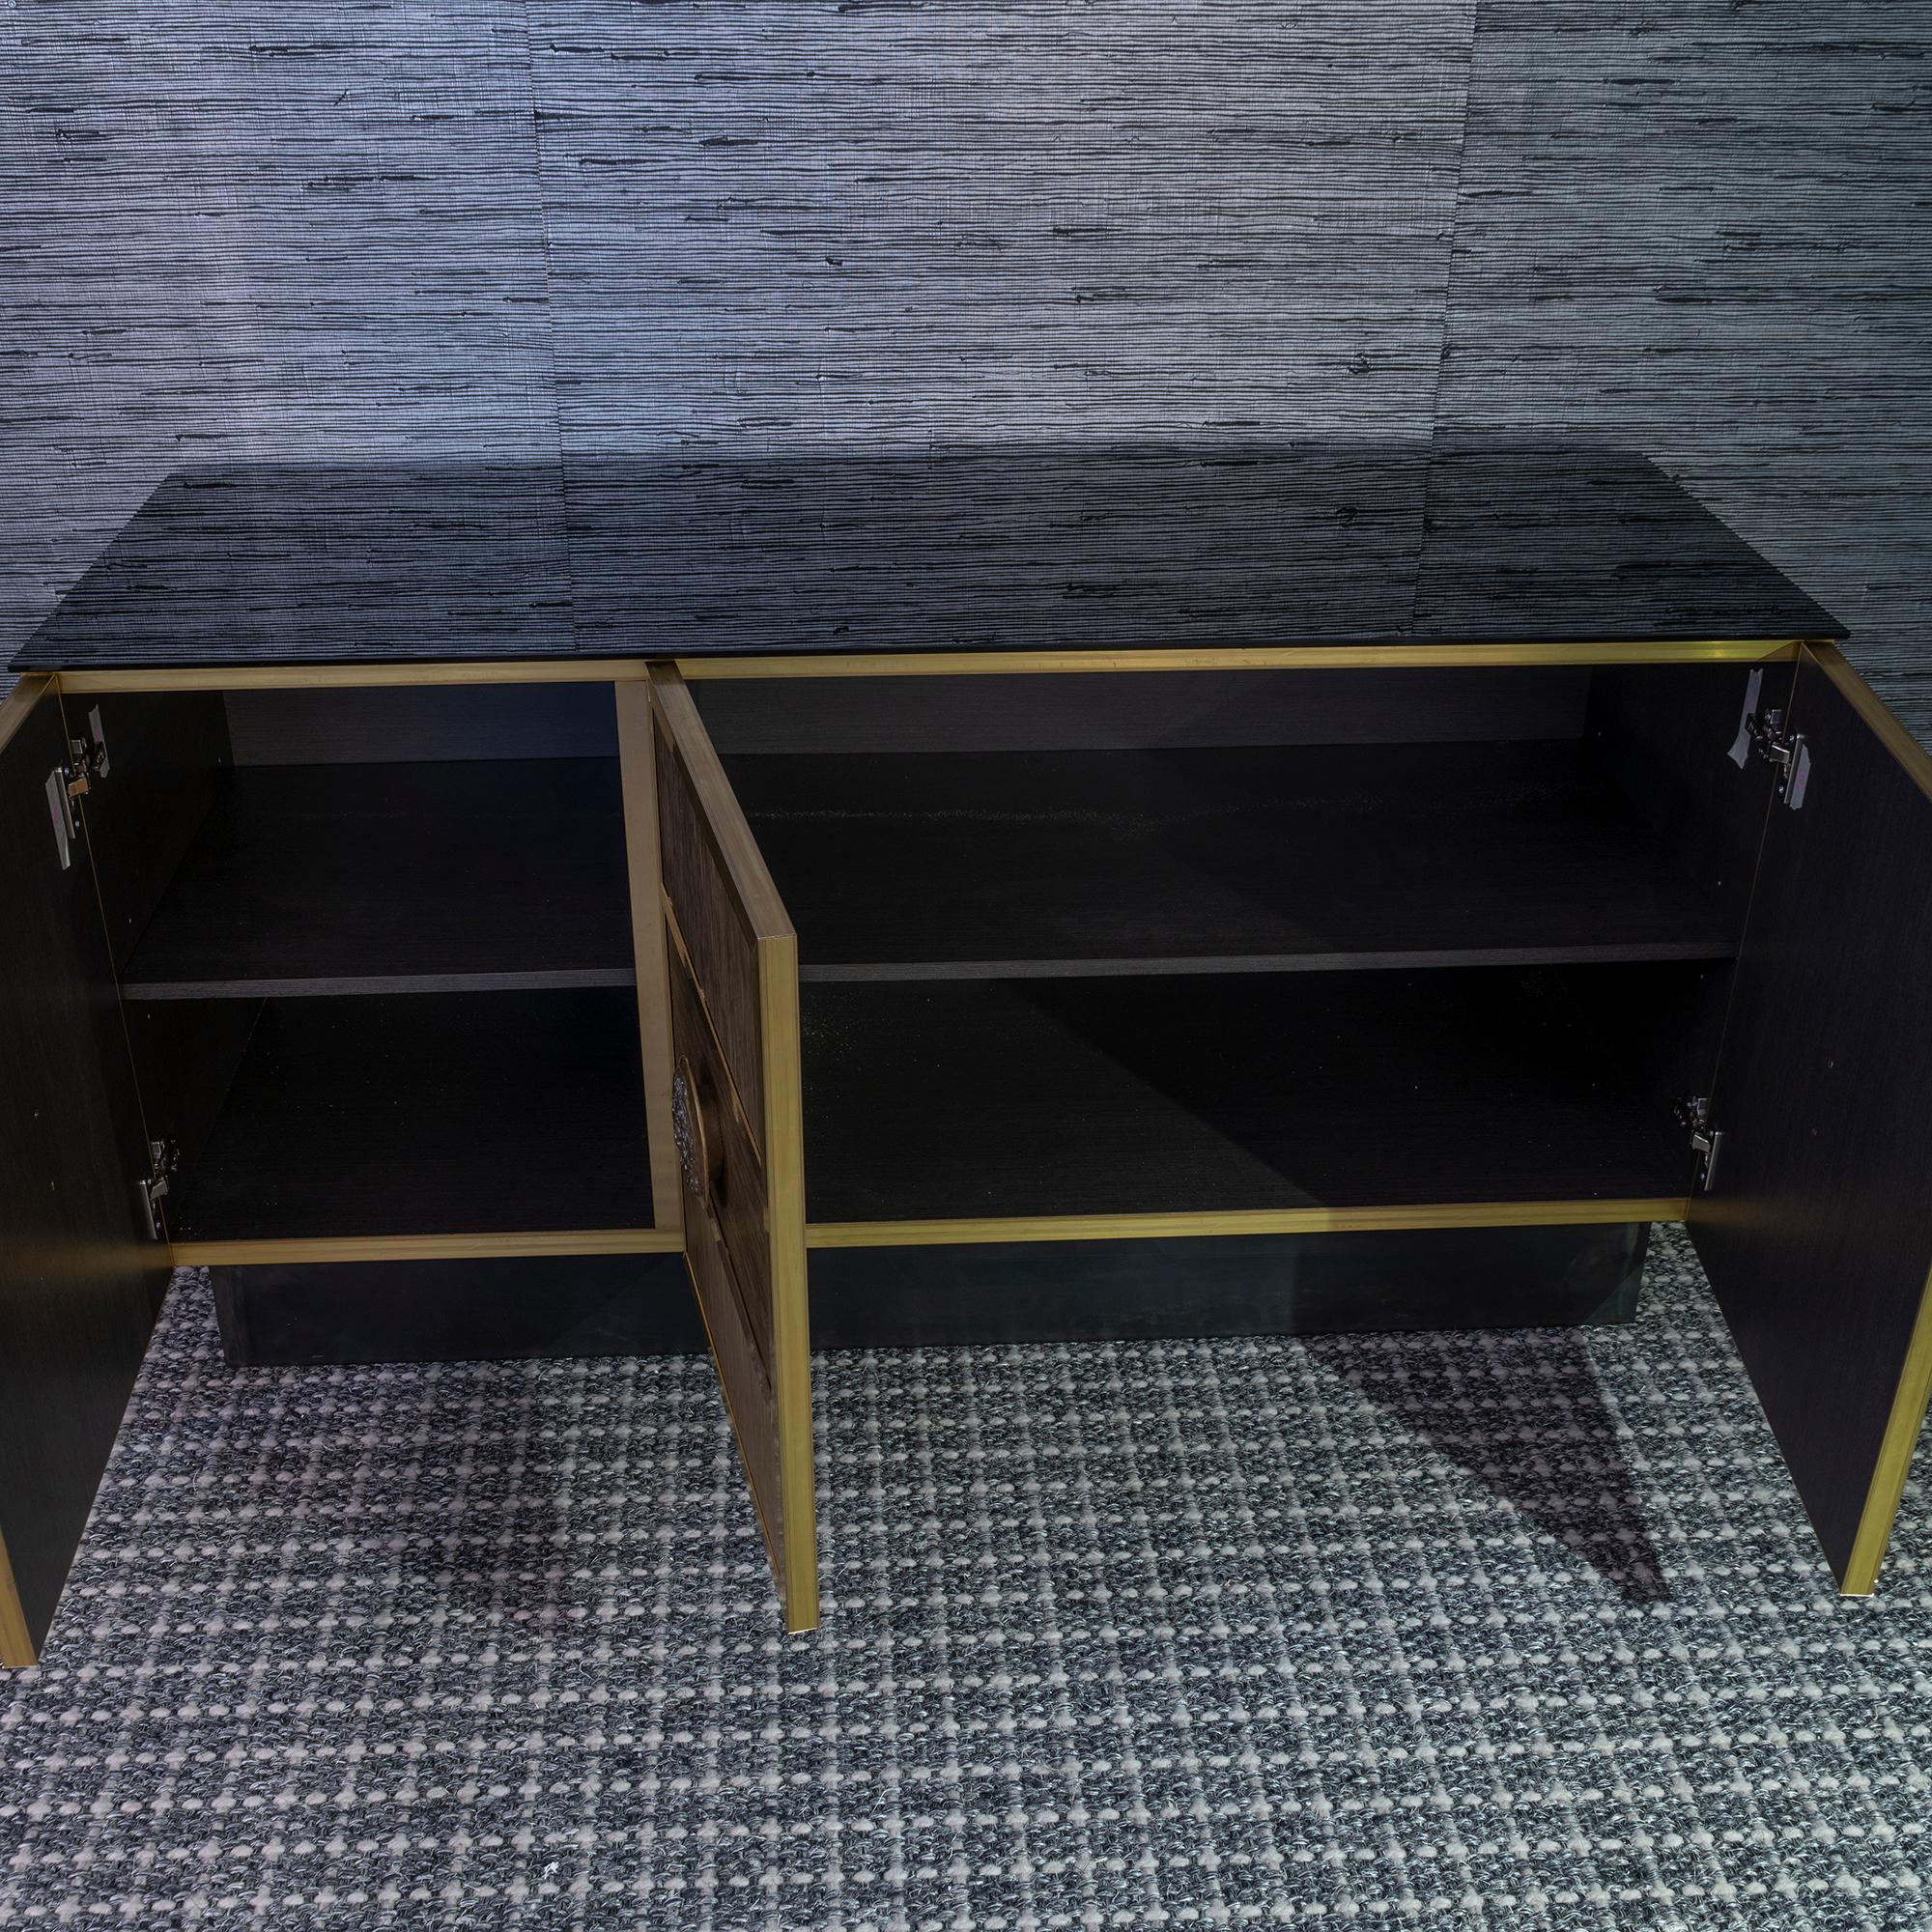 One of a kind three doors sideboard, covered with natural and patined brass wire applied vertically and horizontally as to create a geometrical design, interior in grey laminate, top in black painted glass with vintage patina, natural raw steel